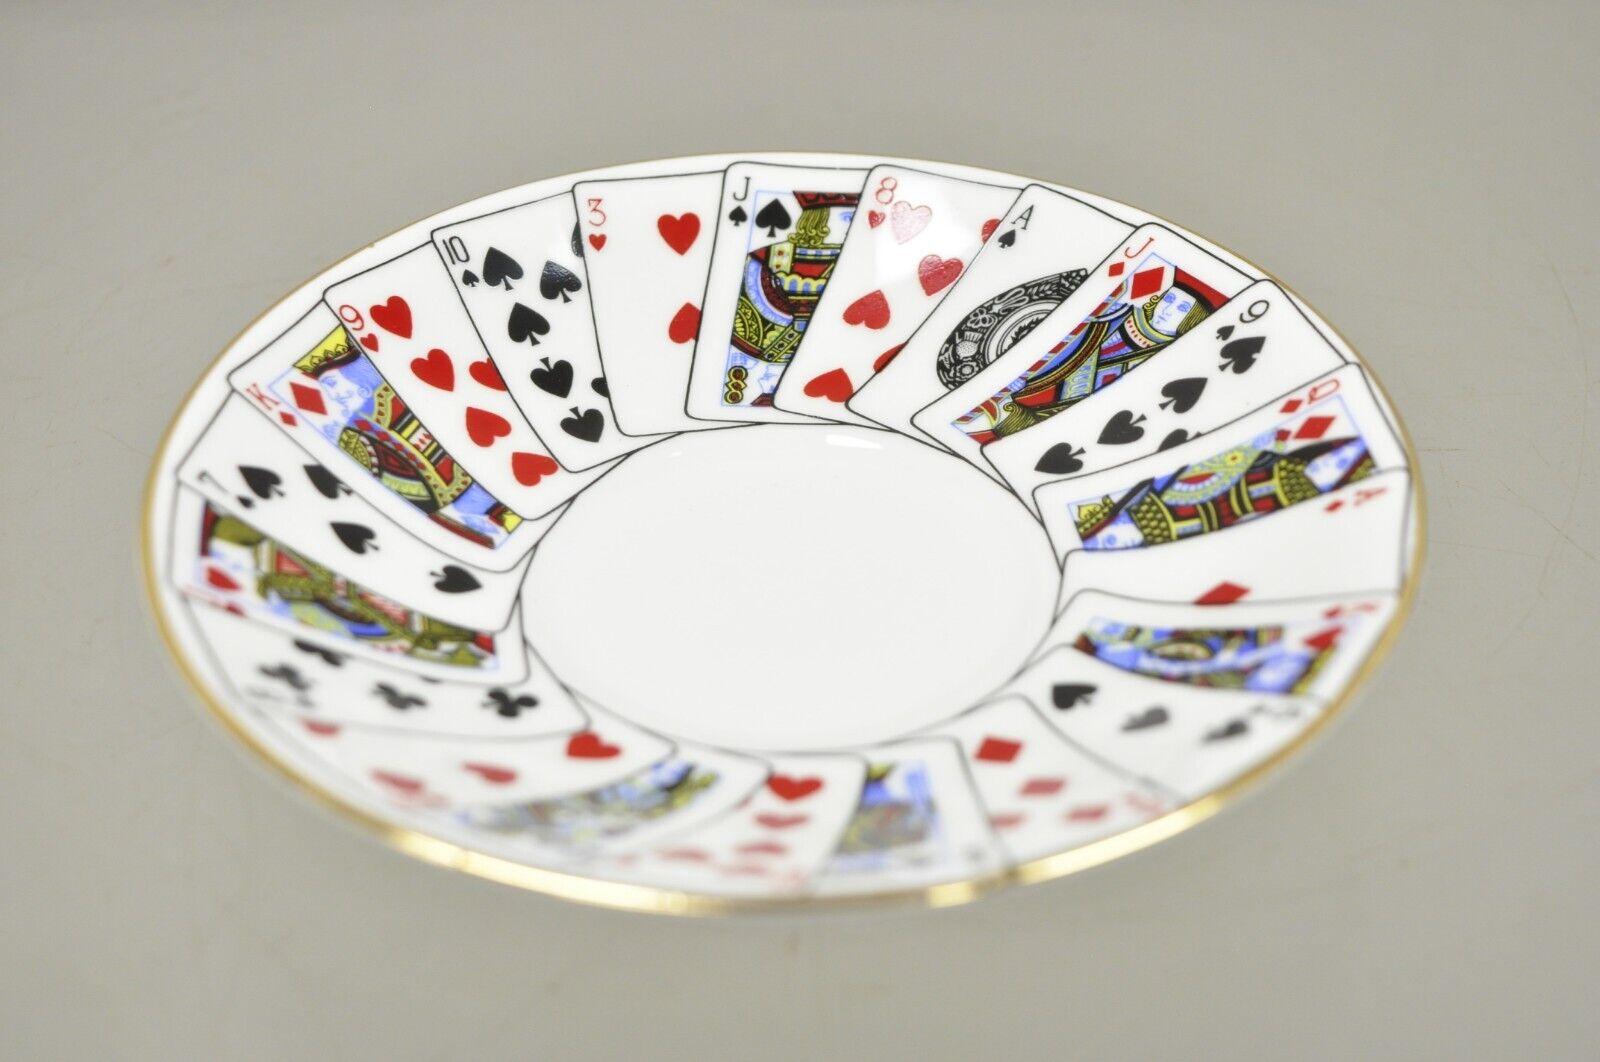 20th Century Tiffany & Co Staffordshire Playing Cards Demitasse Tea Cup & Saucer, Set of 4